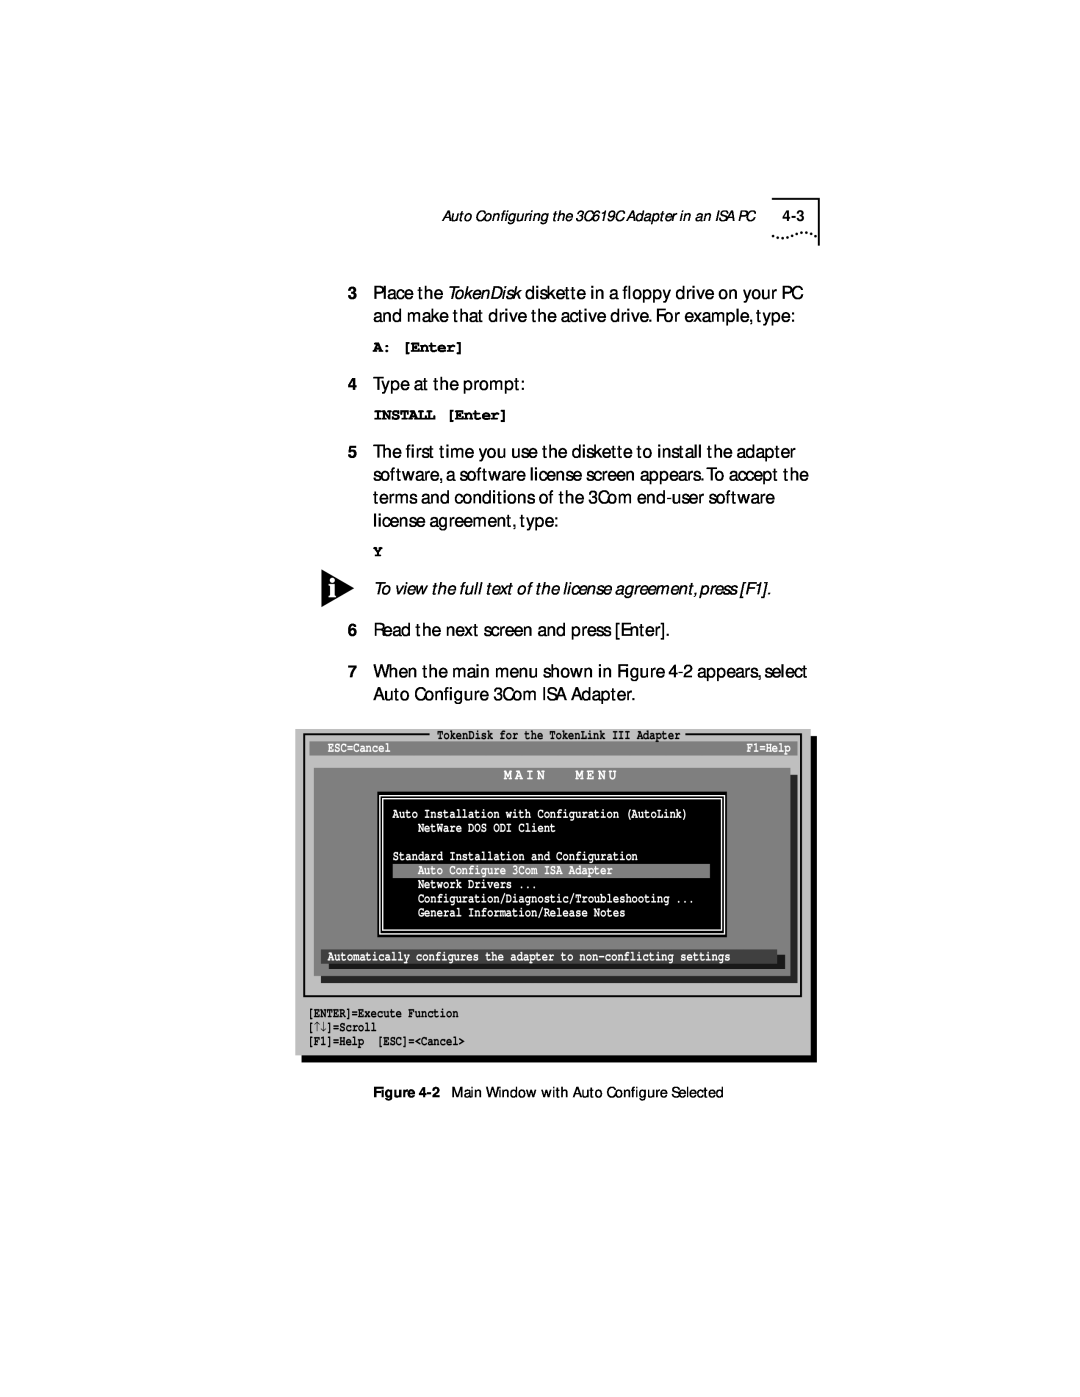 IBM 09-0572-000 manual Type at the prompt, To view the full text of the license agreement, press F1 